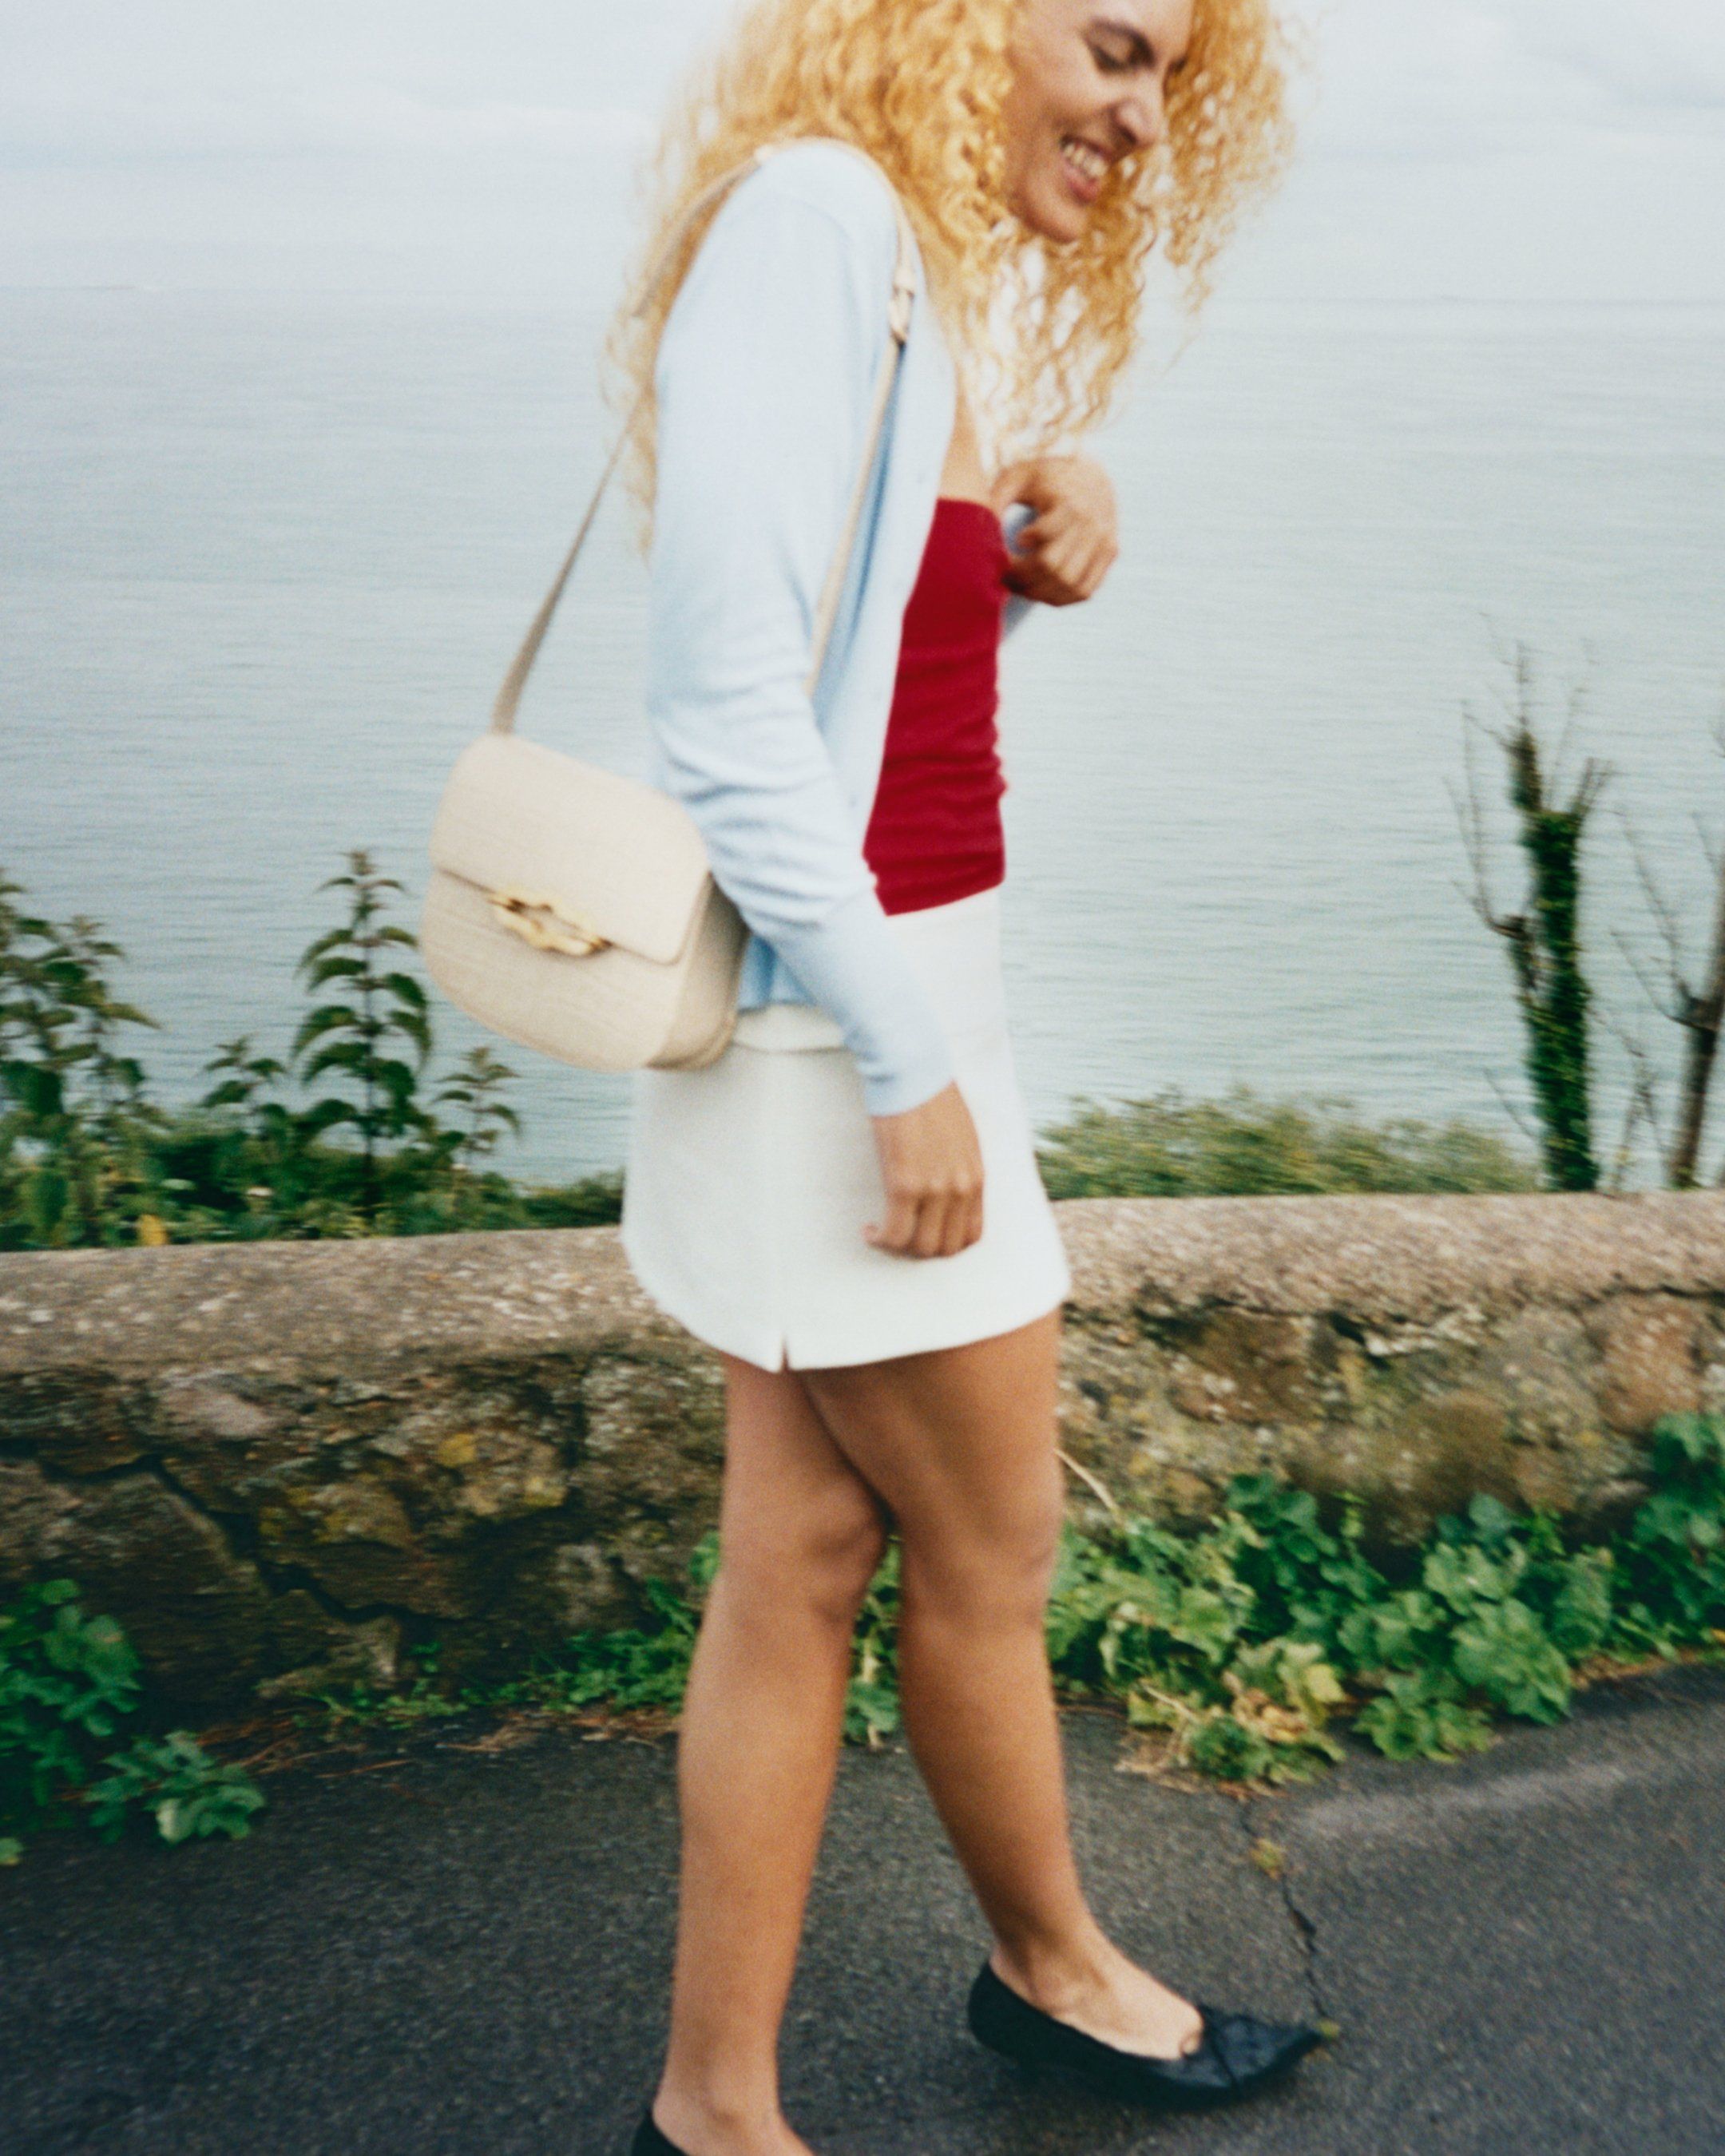 Model wearing the Mulberry Pimlico satchel in eggshell leather with croc print